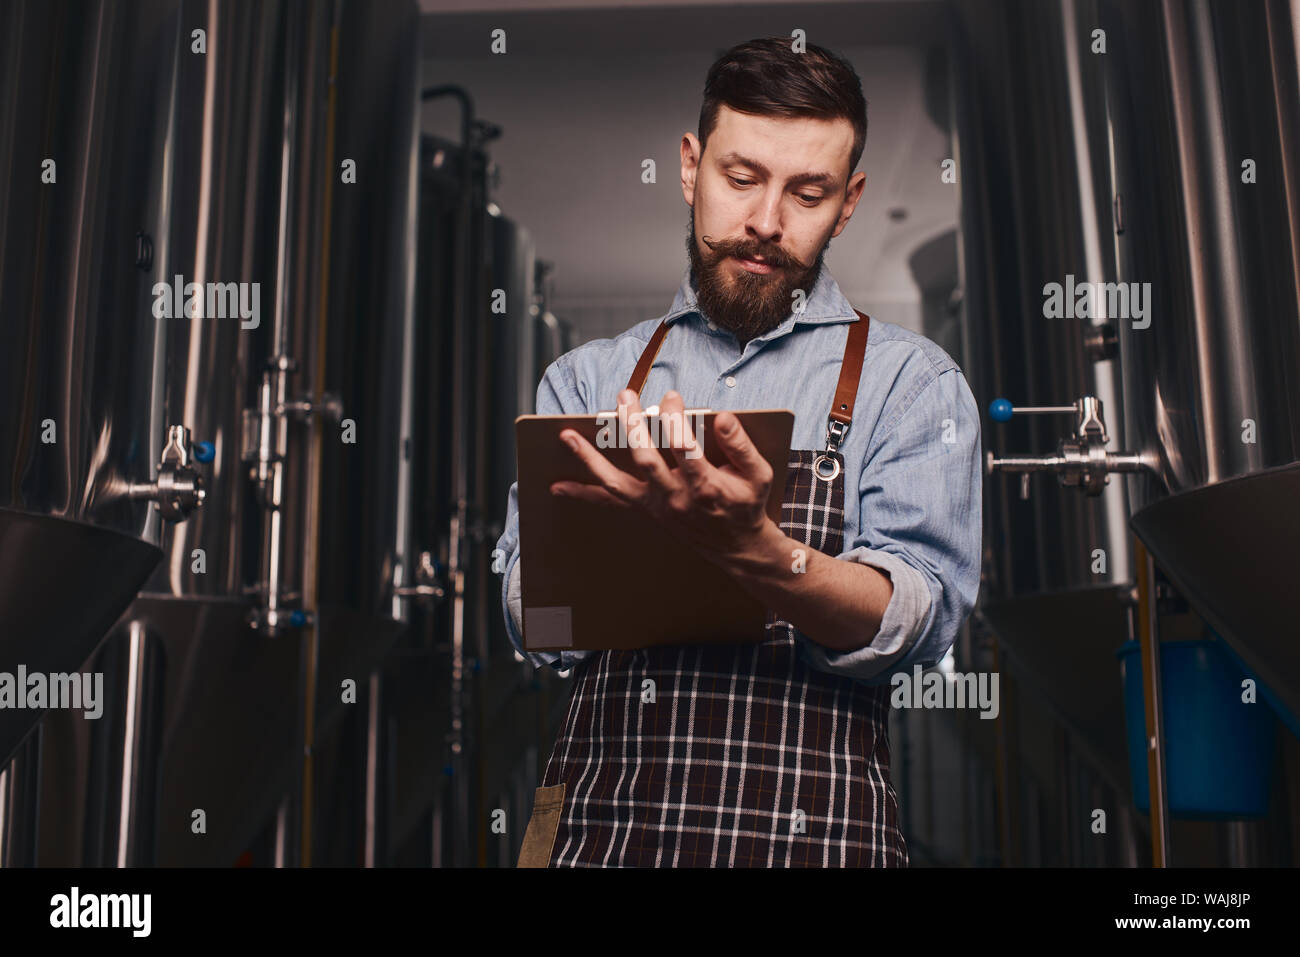 Bartender with the beard and mustache takes orders for the beer he sells at the bar. Stock Photo